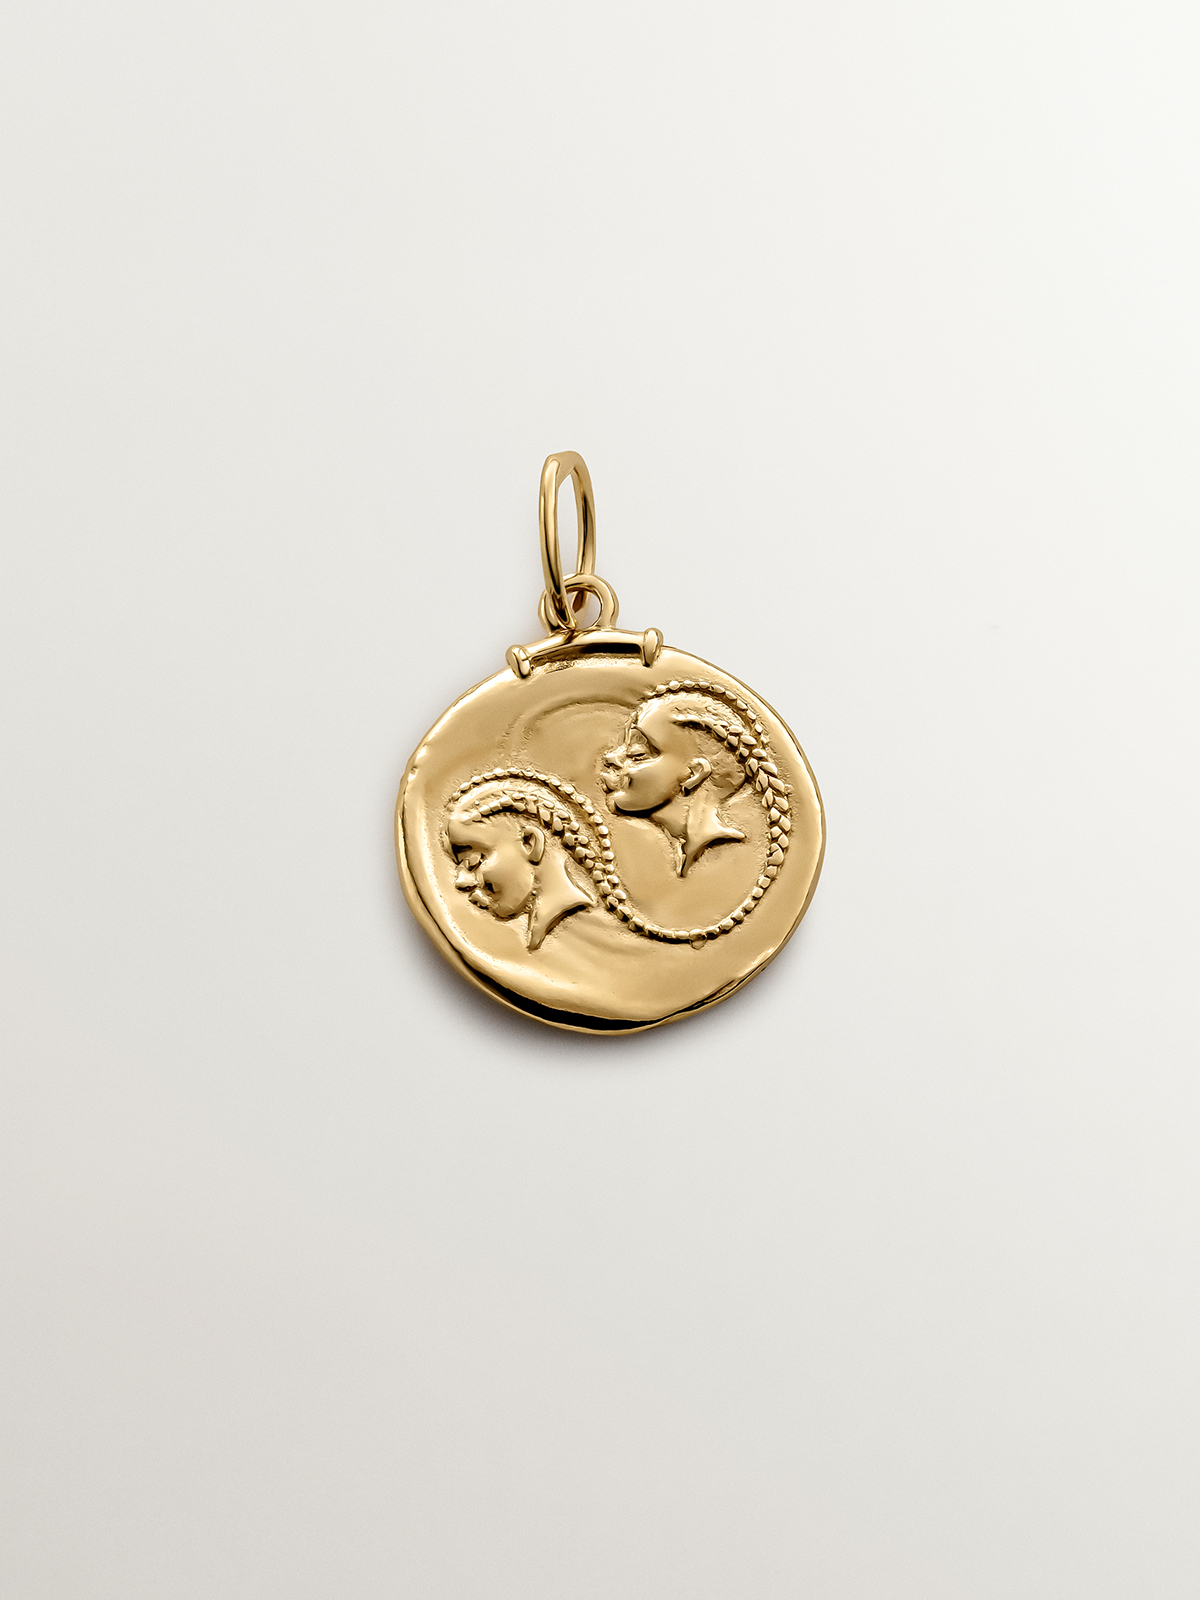 Gemini Charm made of 925 silver, bathed in 18K yellow gold